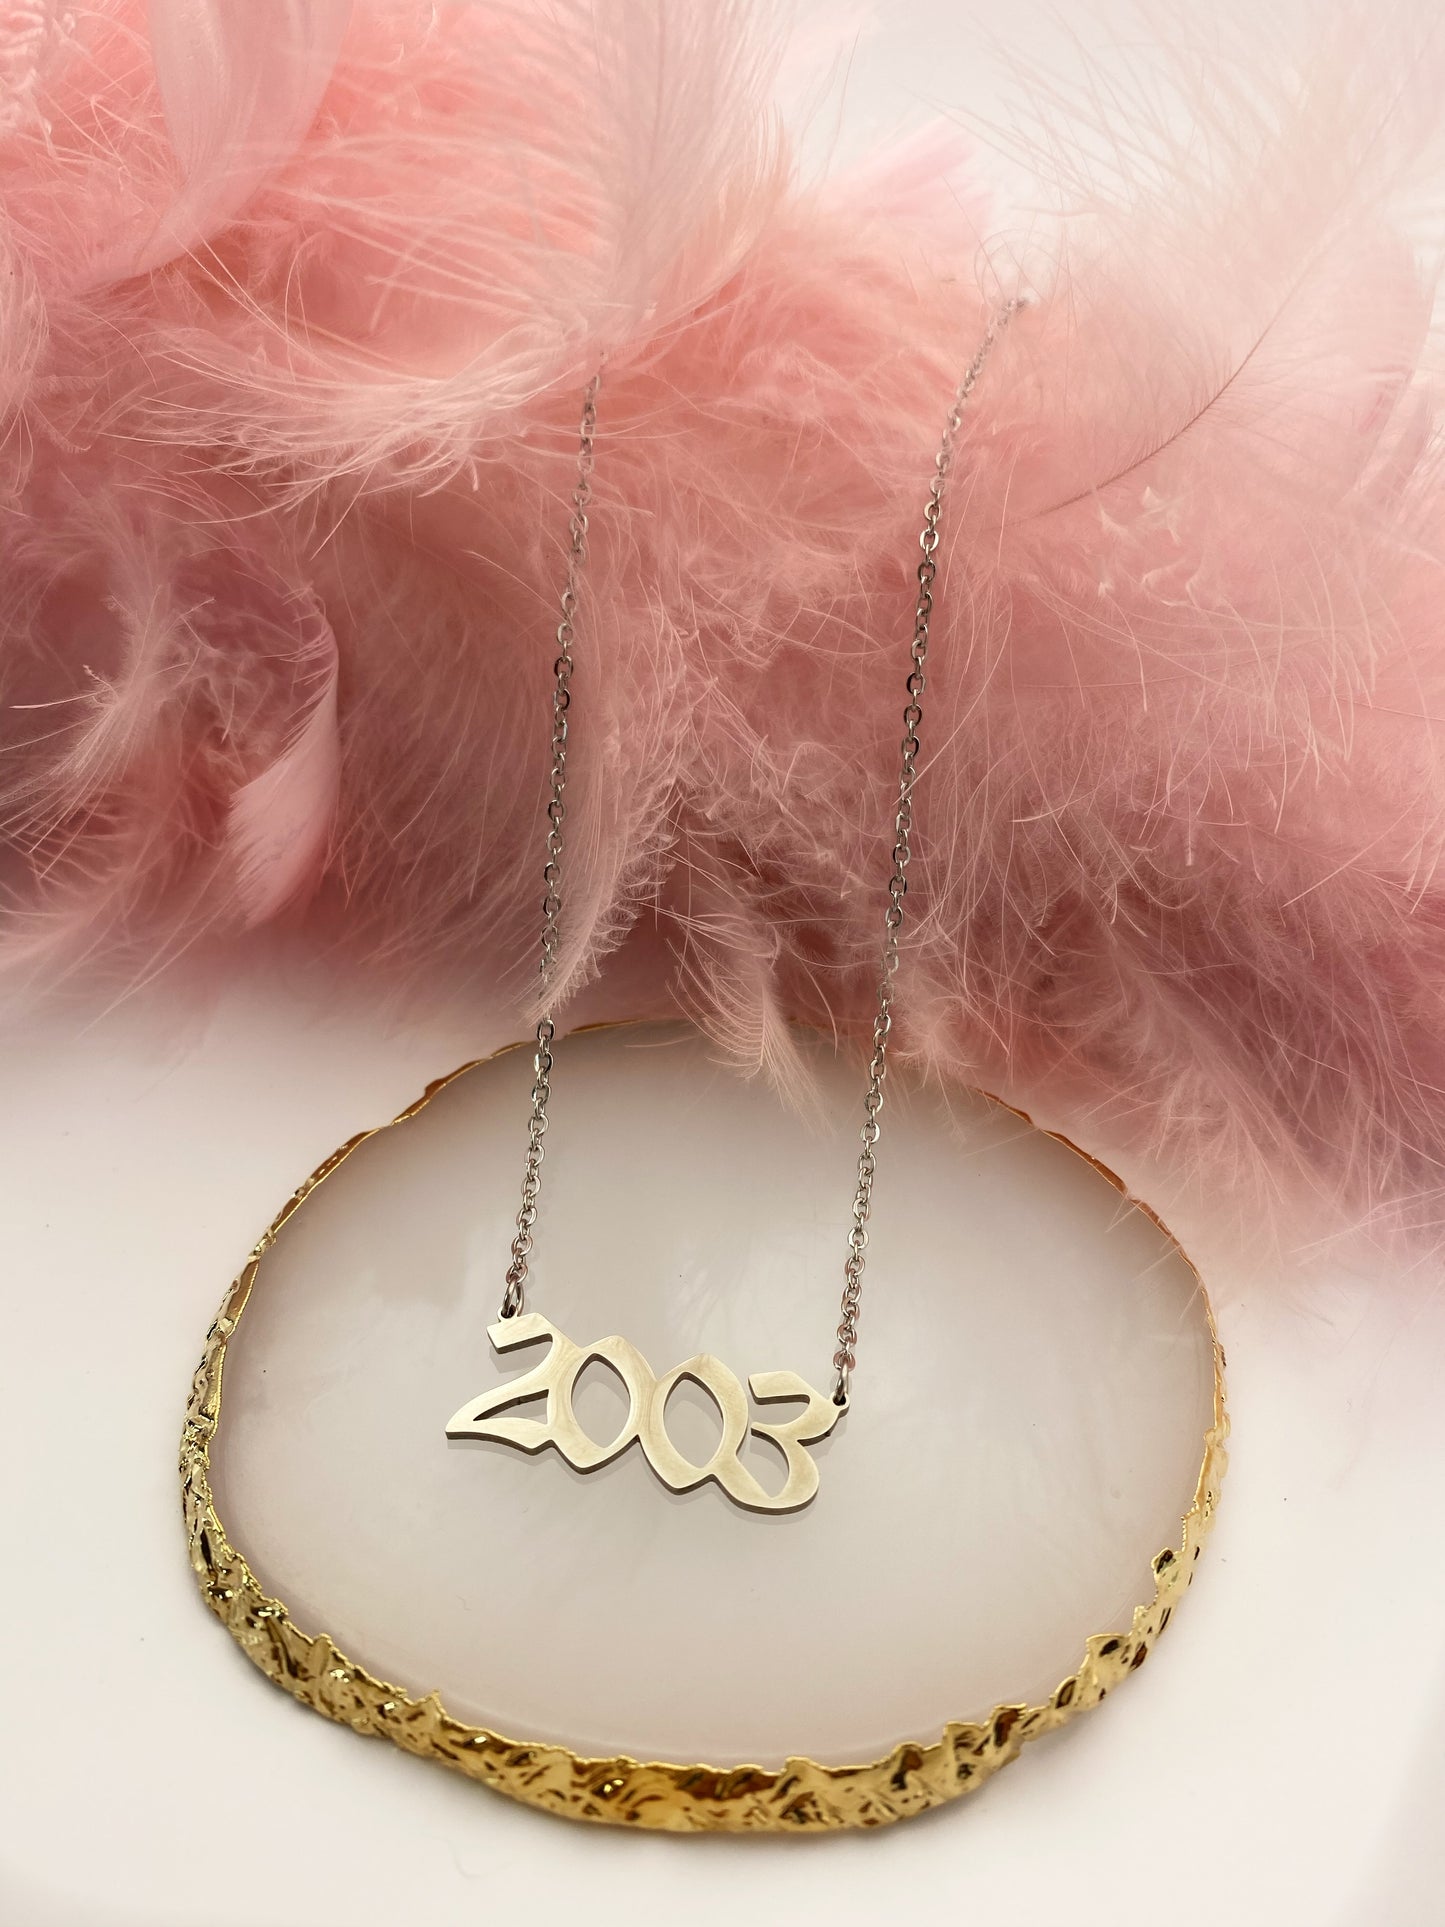 2000's Birth Year Necklaces